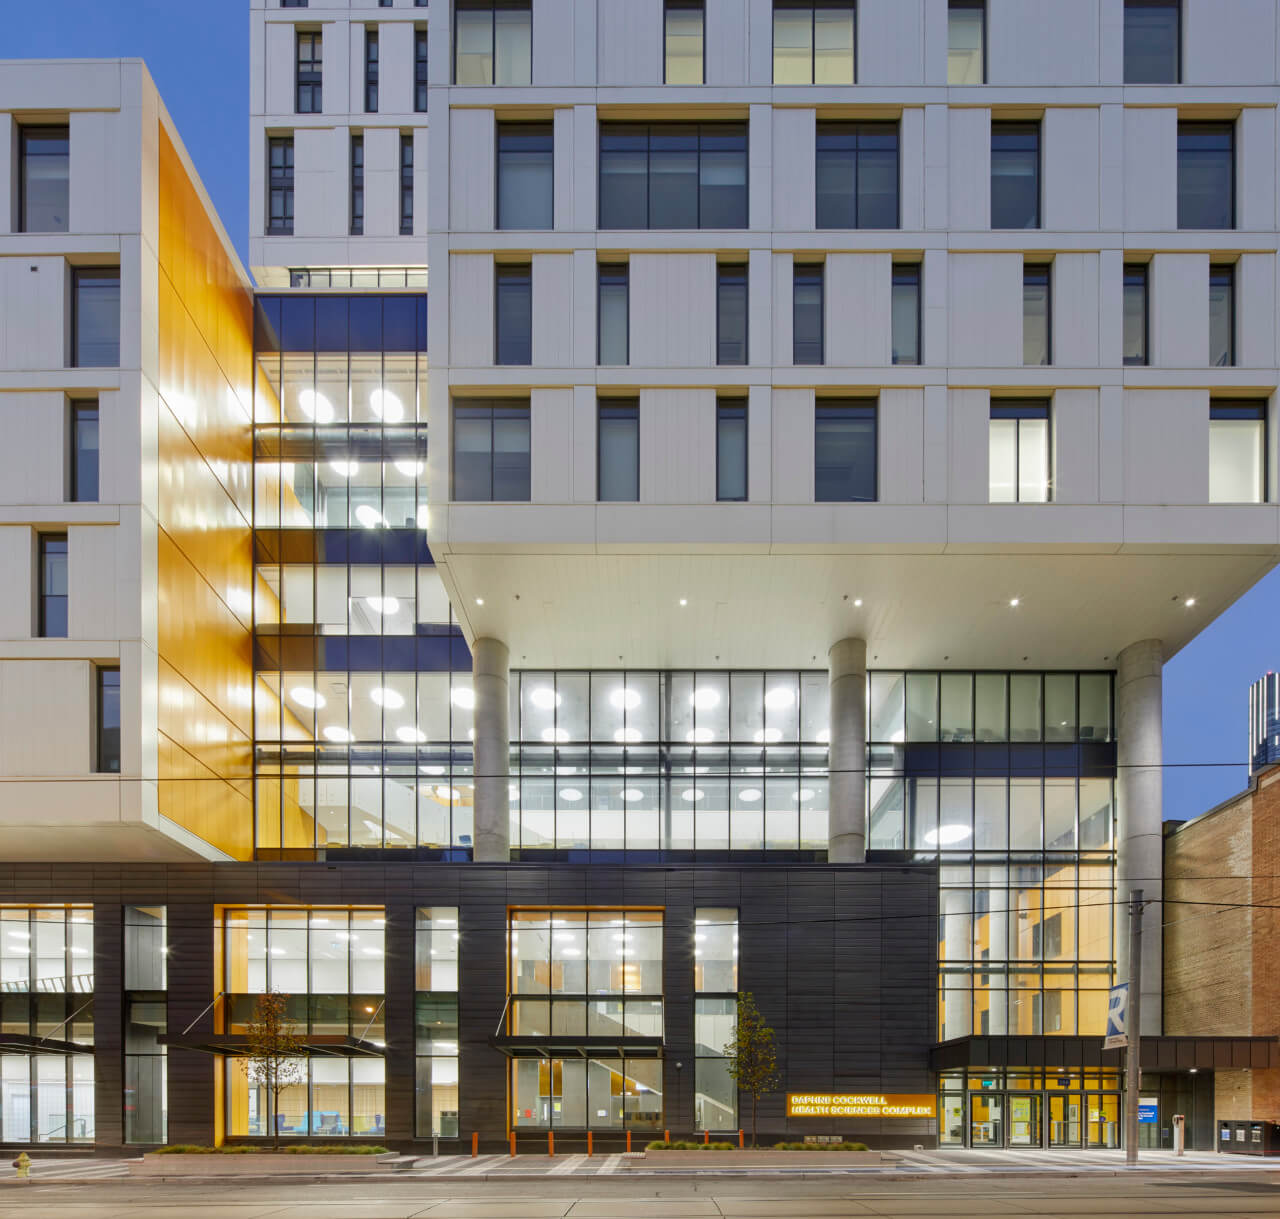 A multifaceted blocky building at Ryerson University